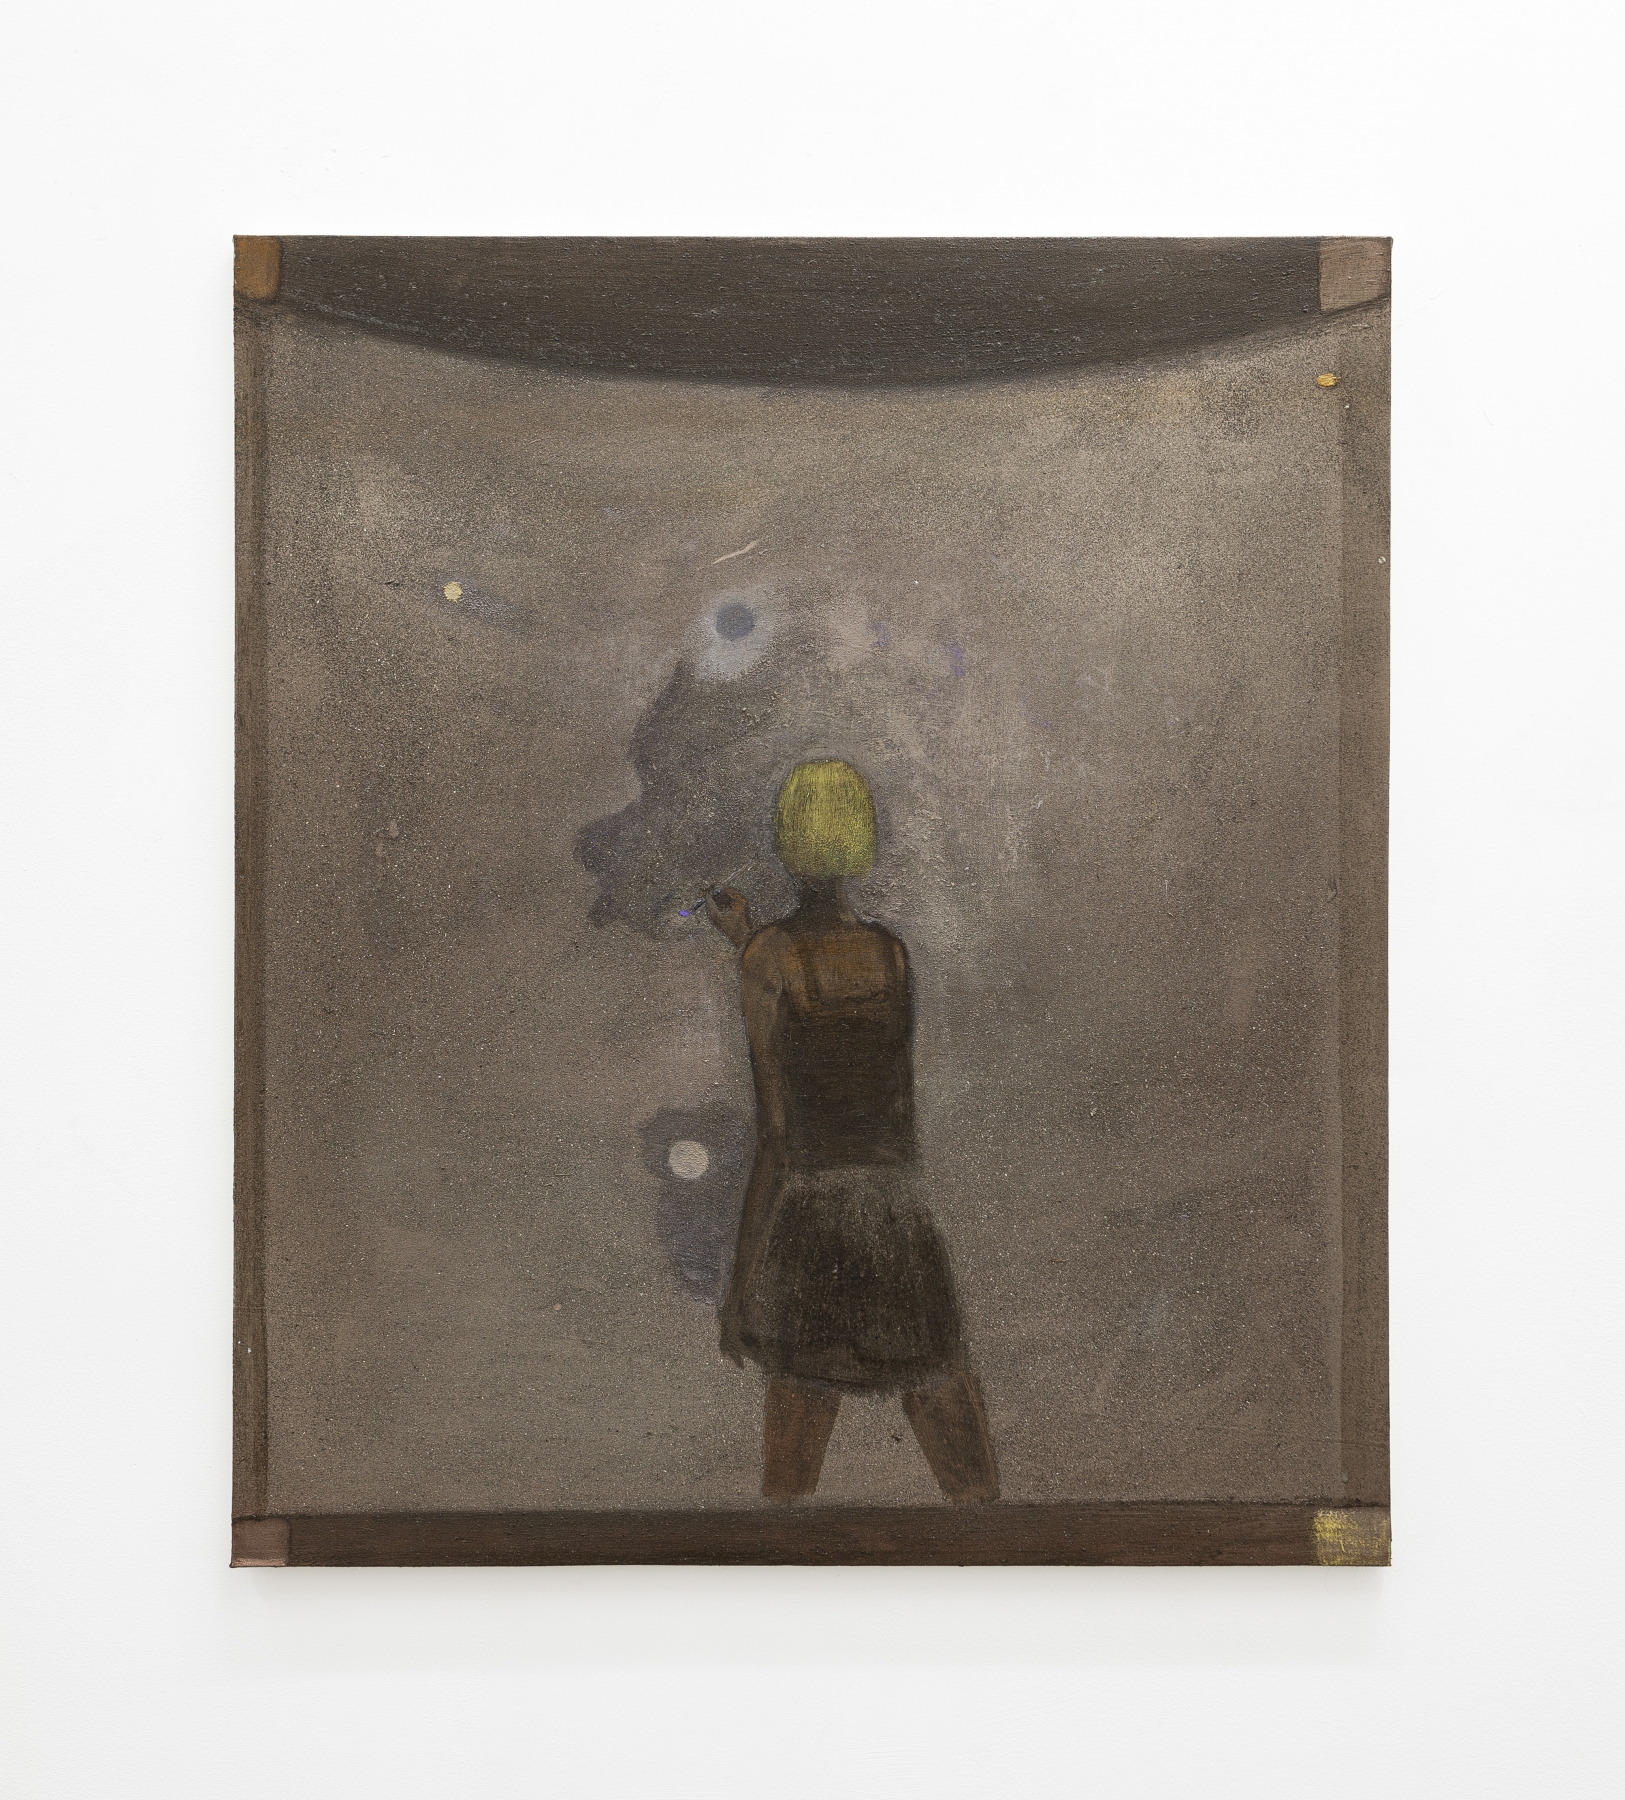 Merlin James&nbsp;
Untitled, 2021
acrylic and ash on cotton
87 x 75 cm / 34.3 x 29.5 in&nbsp;